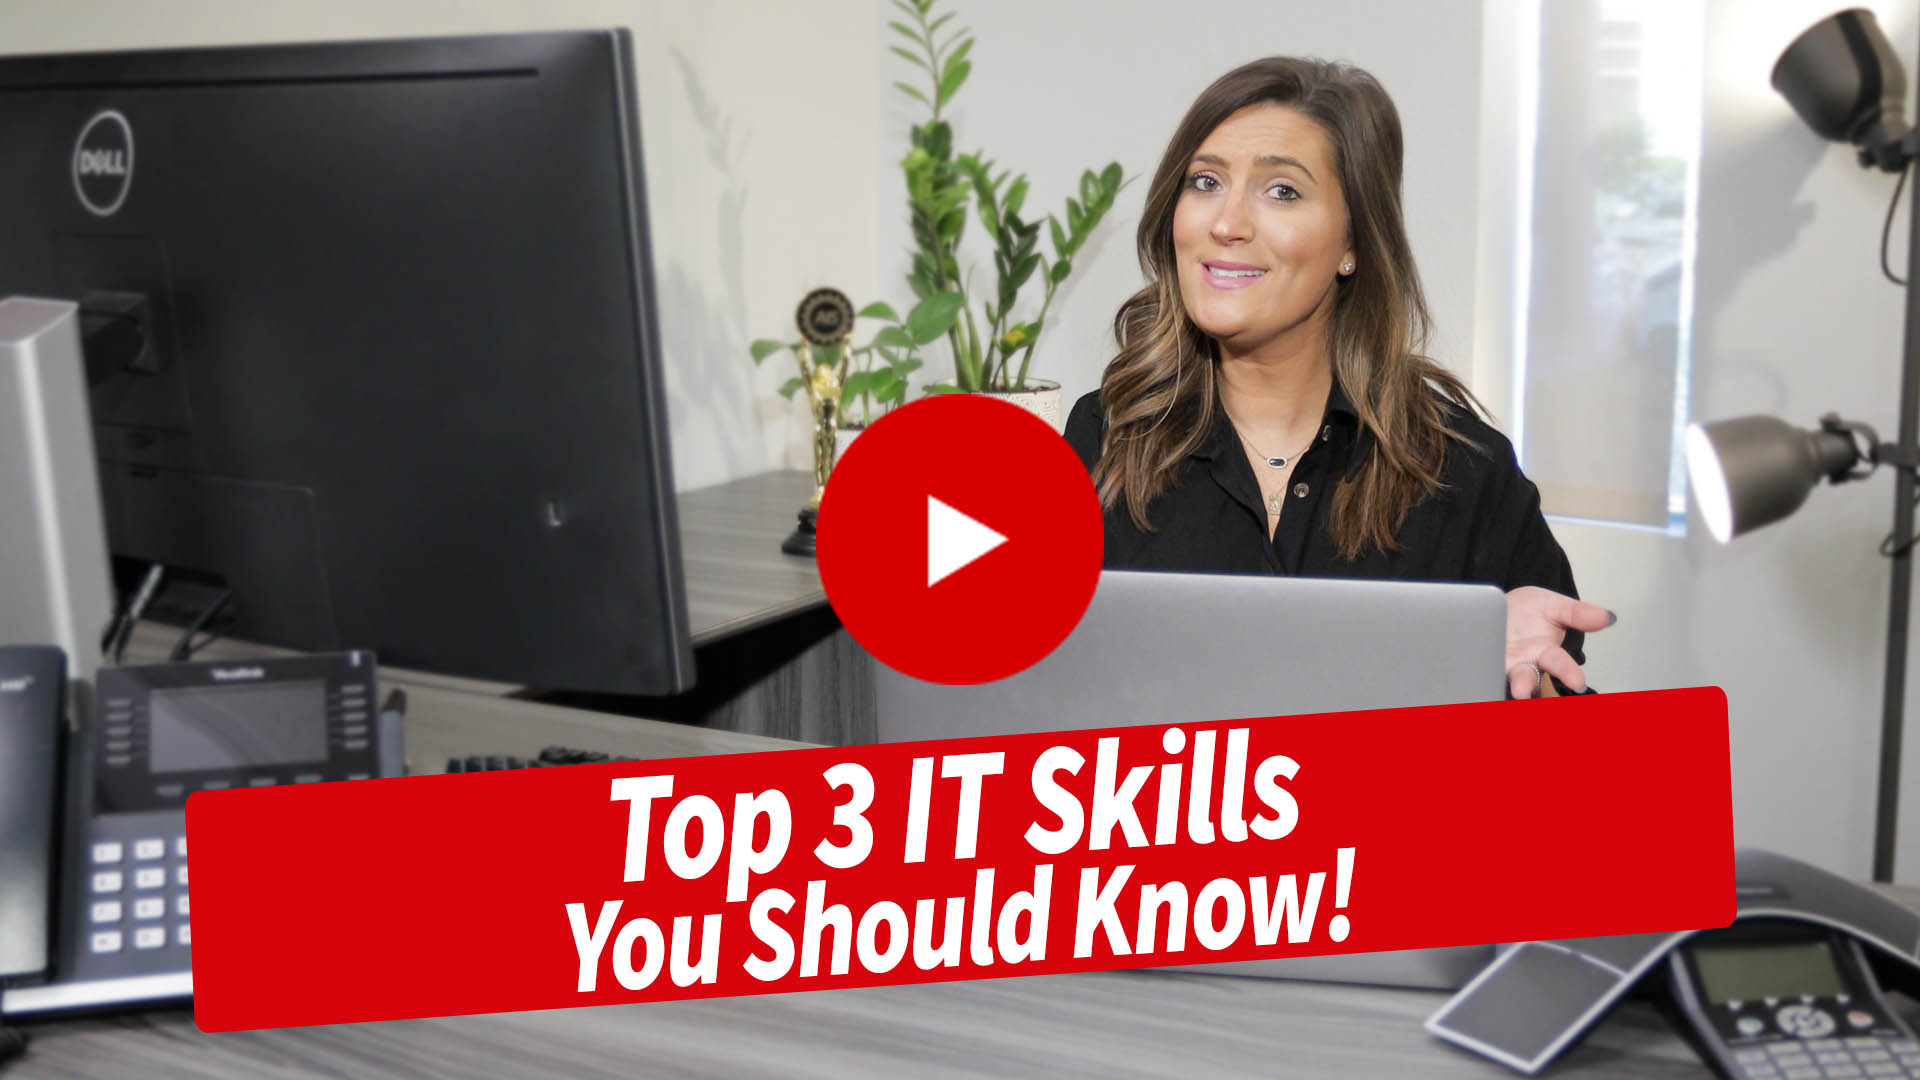 Top 3 IT Skills You Should Know